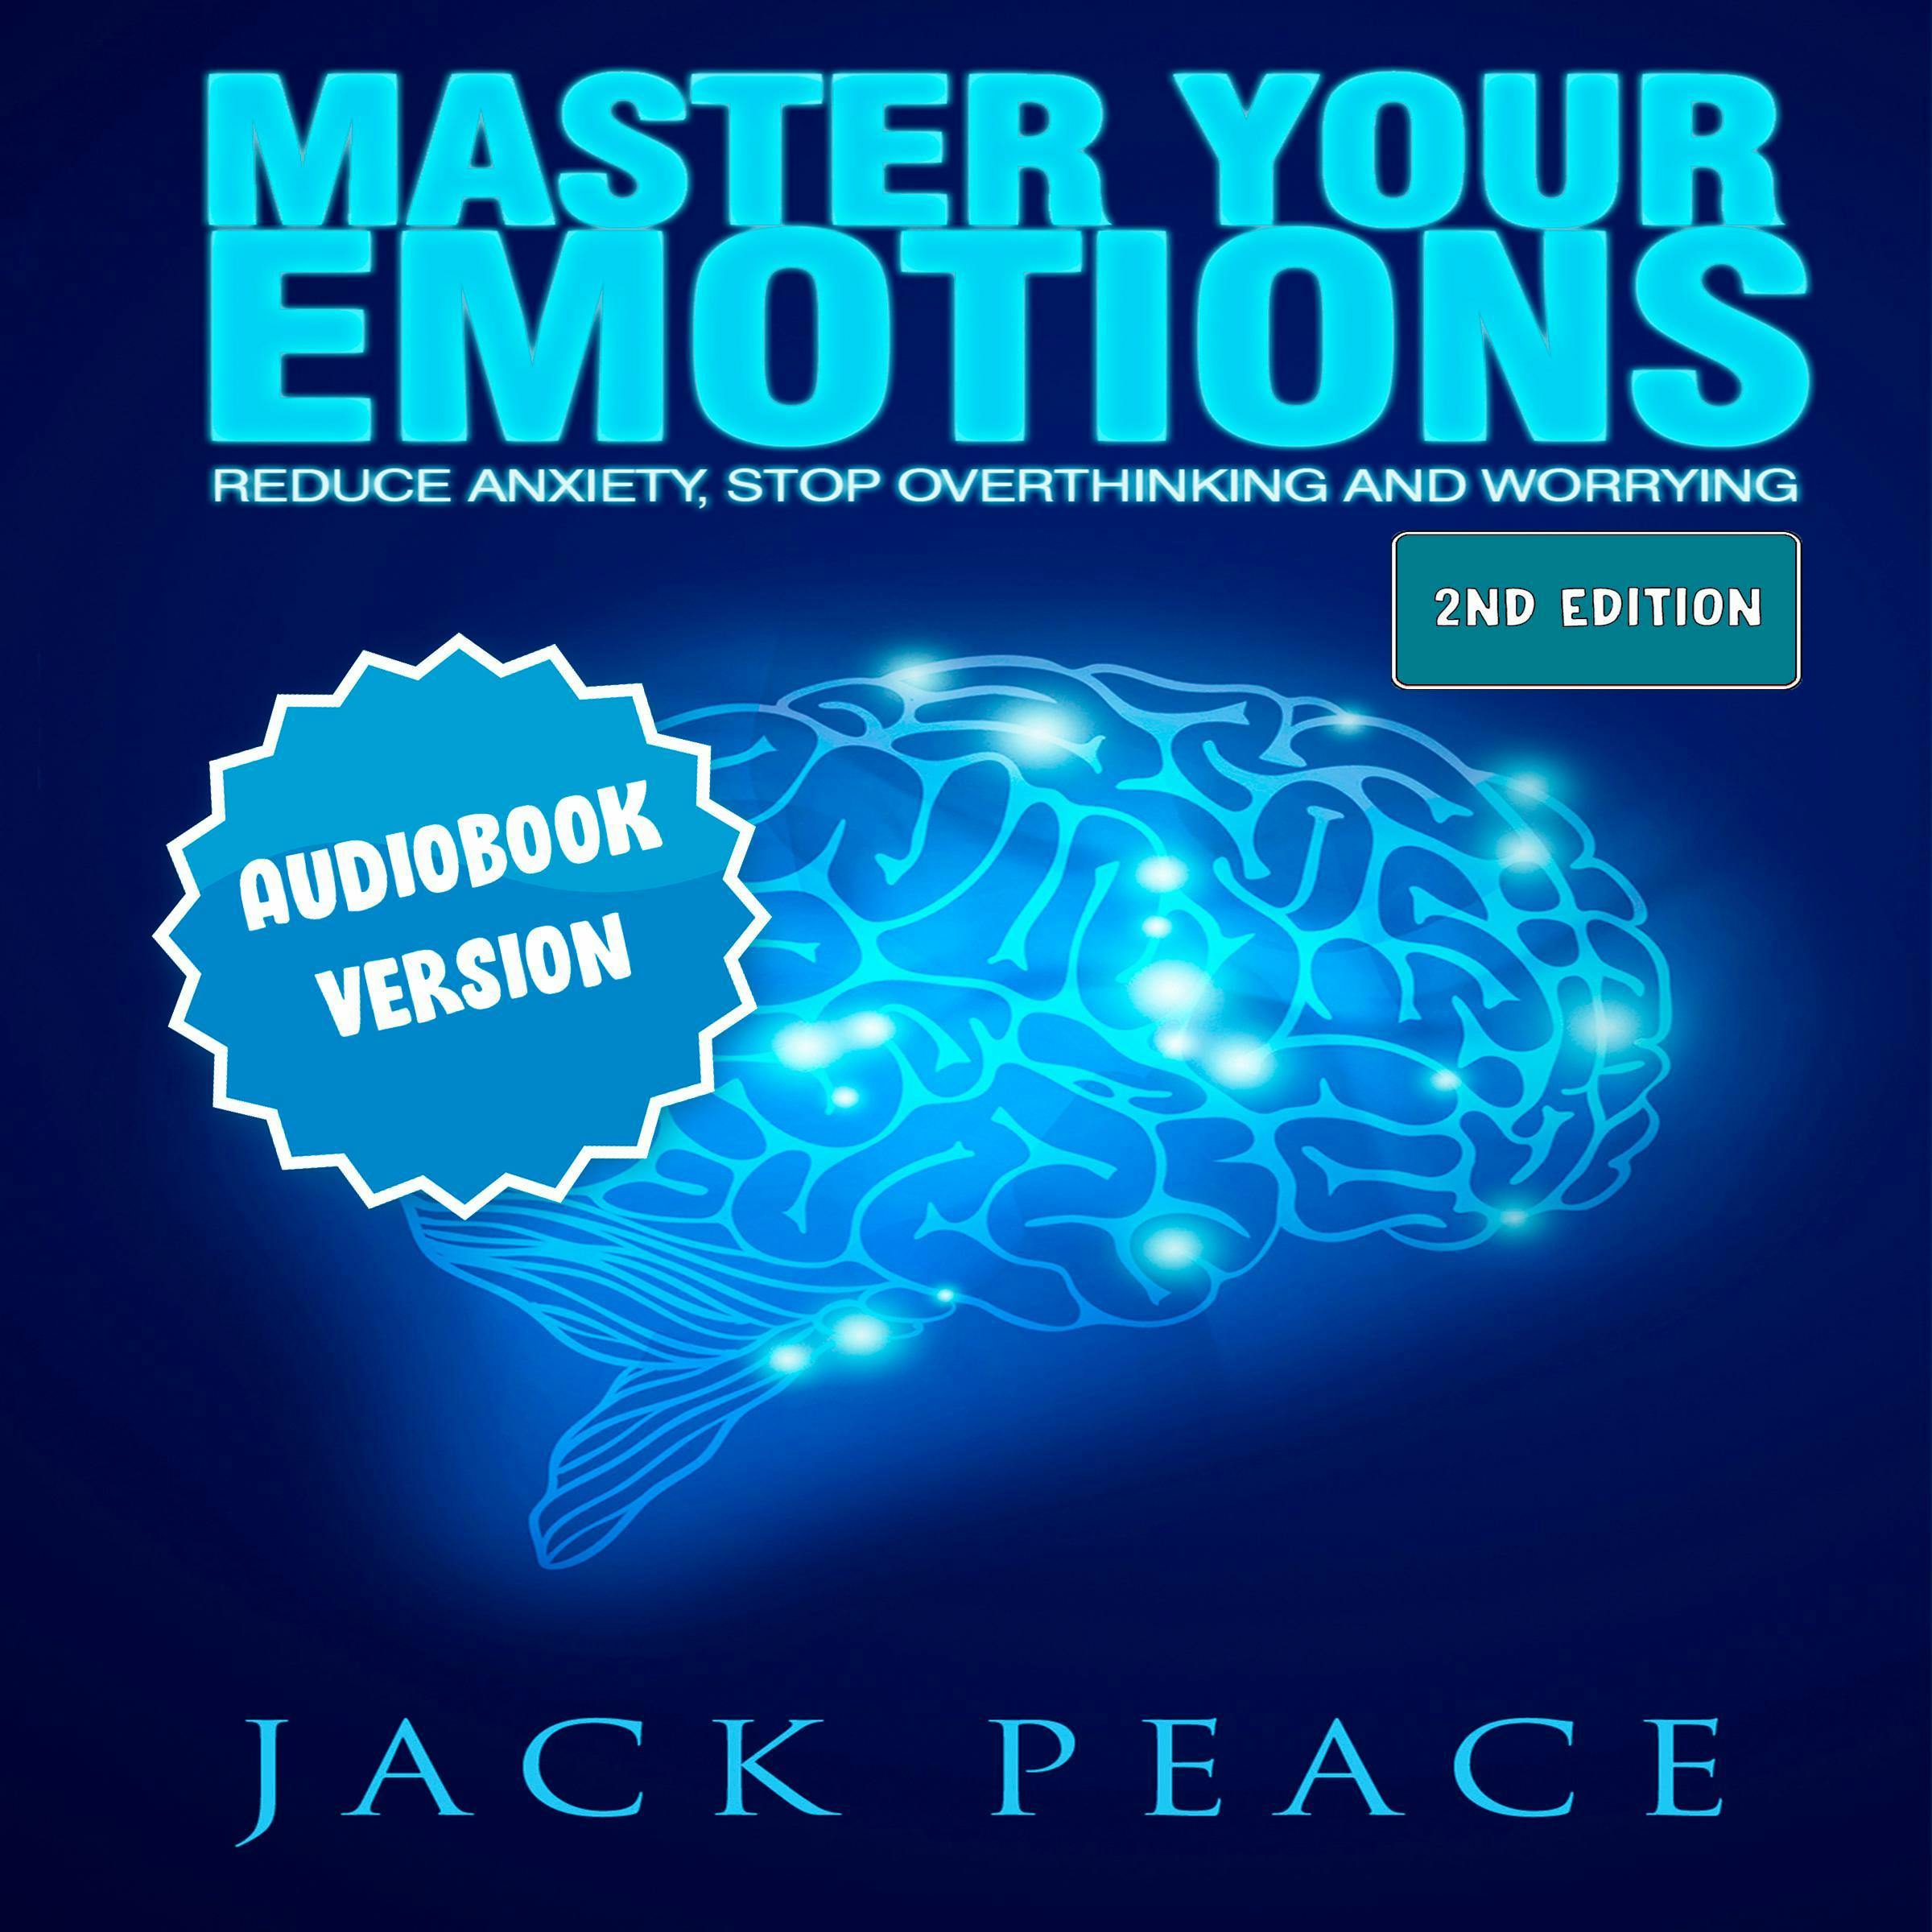 Master Your Emotions: Reduce Anxiety, Declutter Your Mind, Stop Over thinking and Worrying (2nd Edition) - Jack Peace